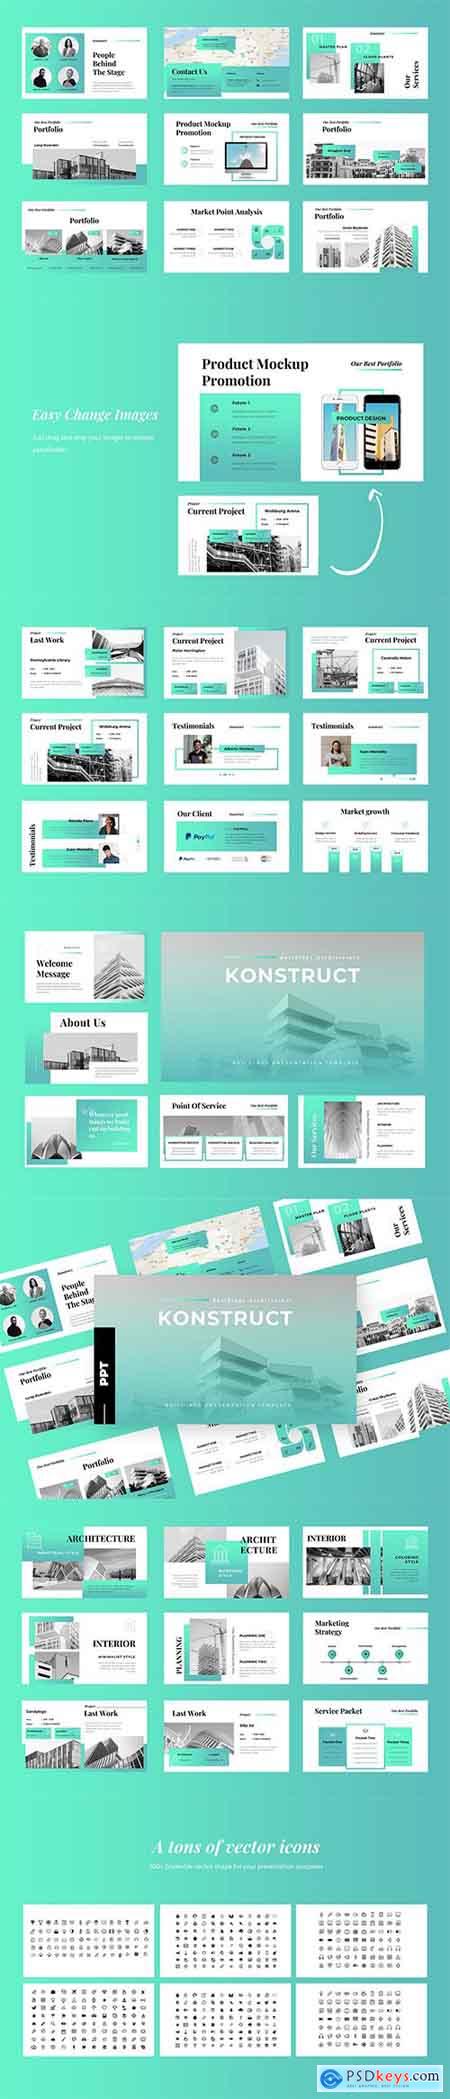 Konstruct - Architecture PowerPoint, Keynote and Google Slides Template